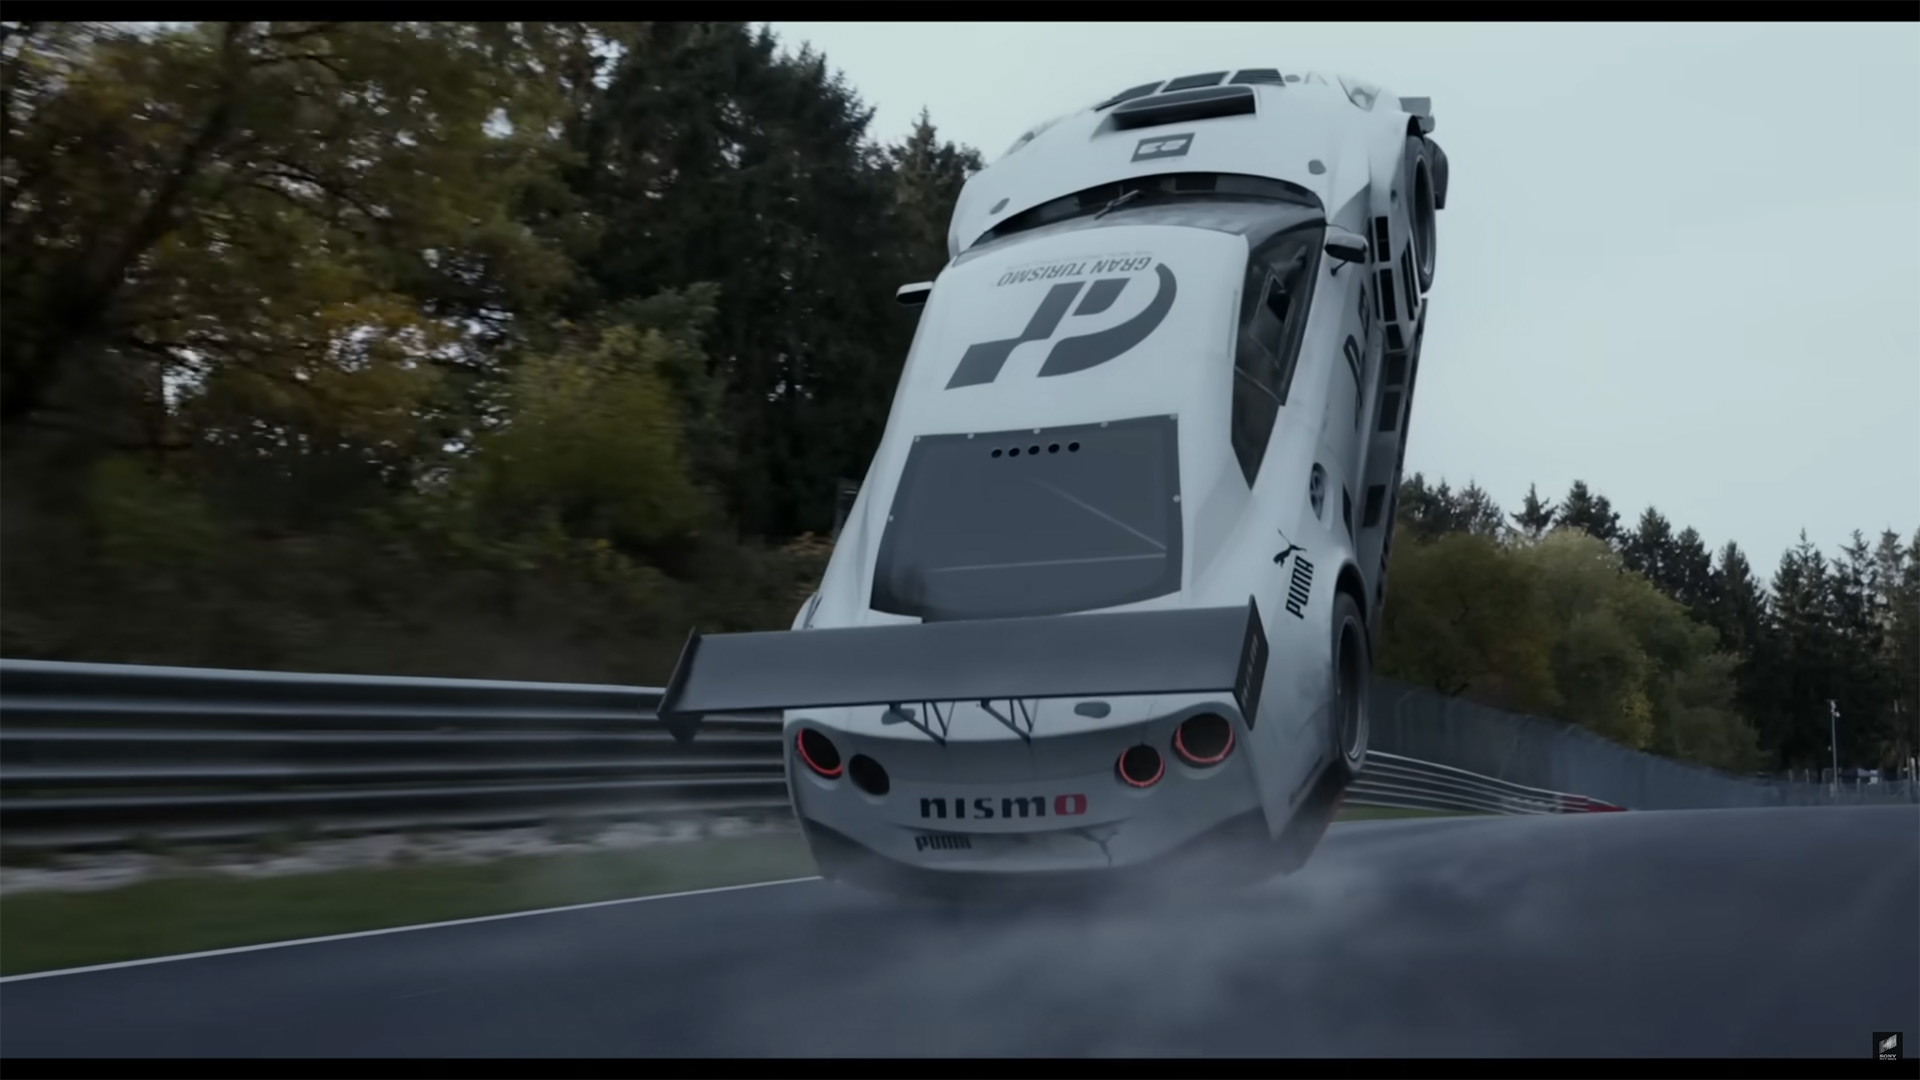 The Gran Turismo movie arrives in theaters August 11